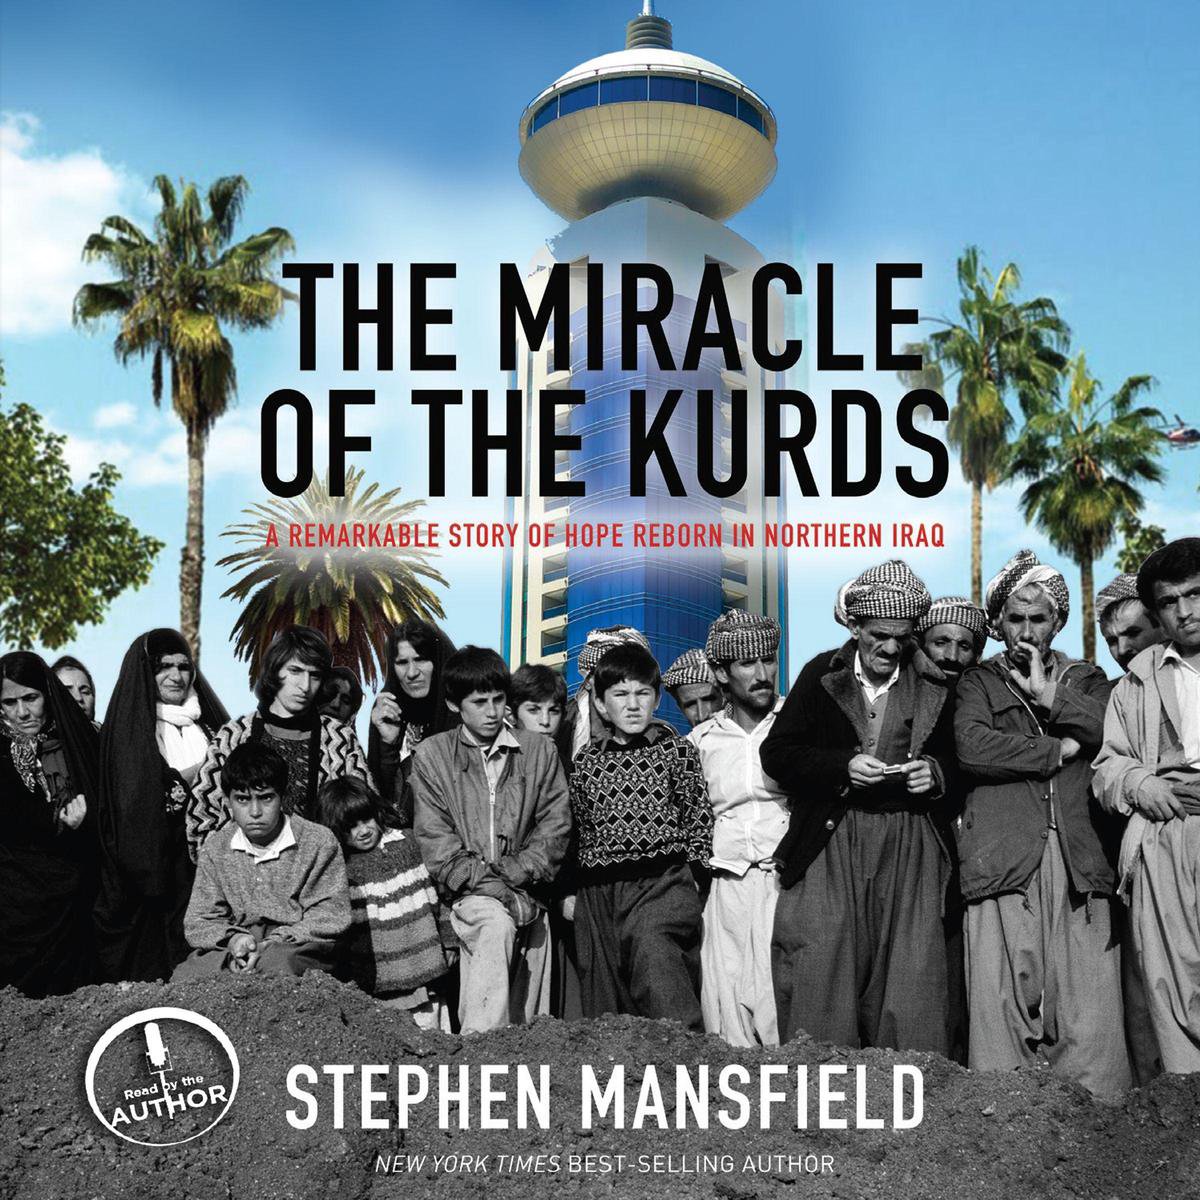 The Miracle of the Kurds - Stephen Mansfield